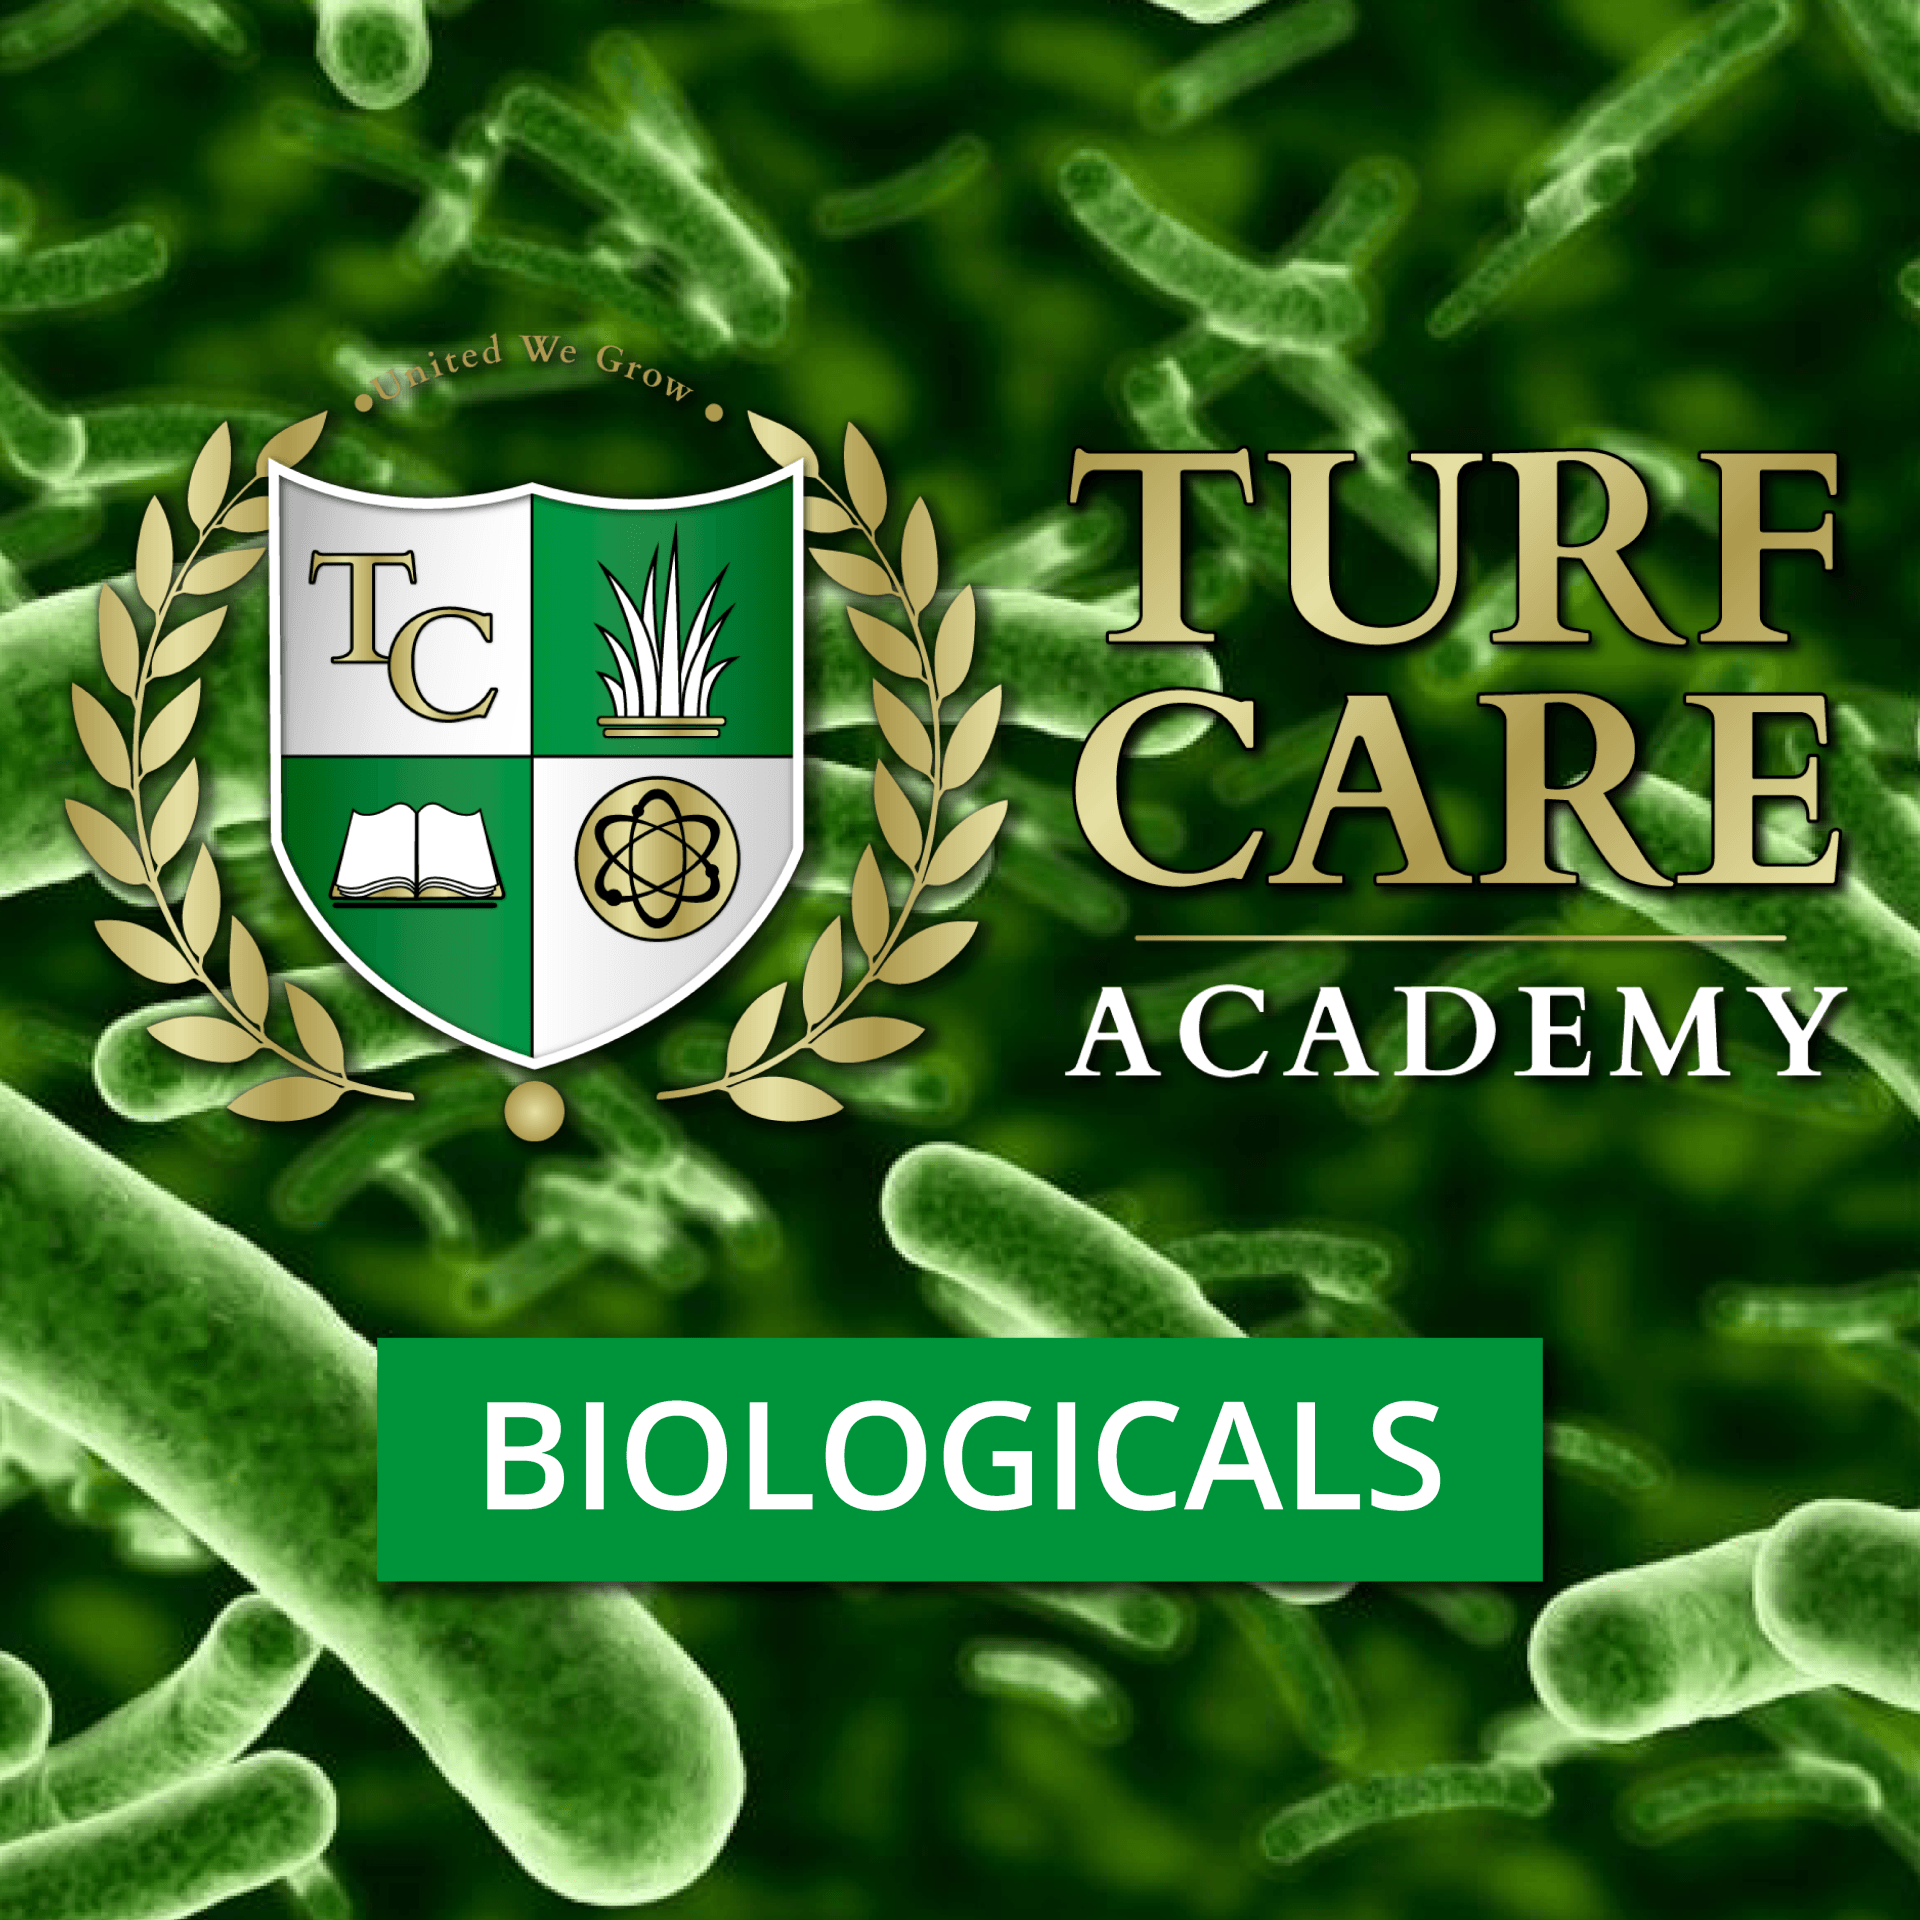 Turf Care Academy logo with Biologicals subject. Green microbes in background.